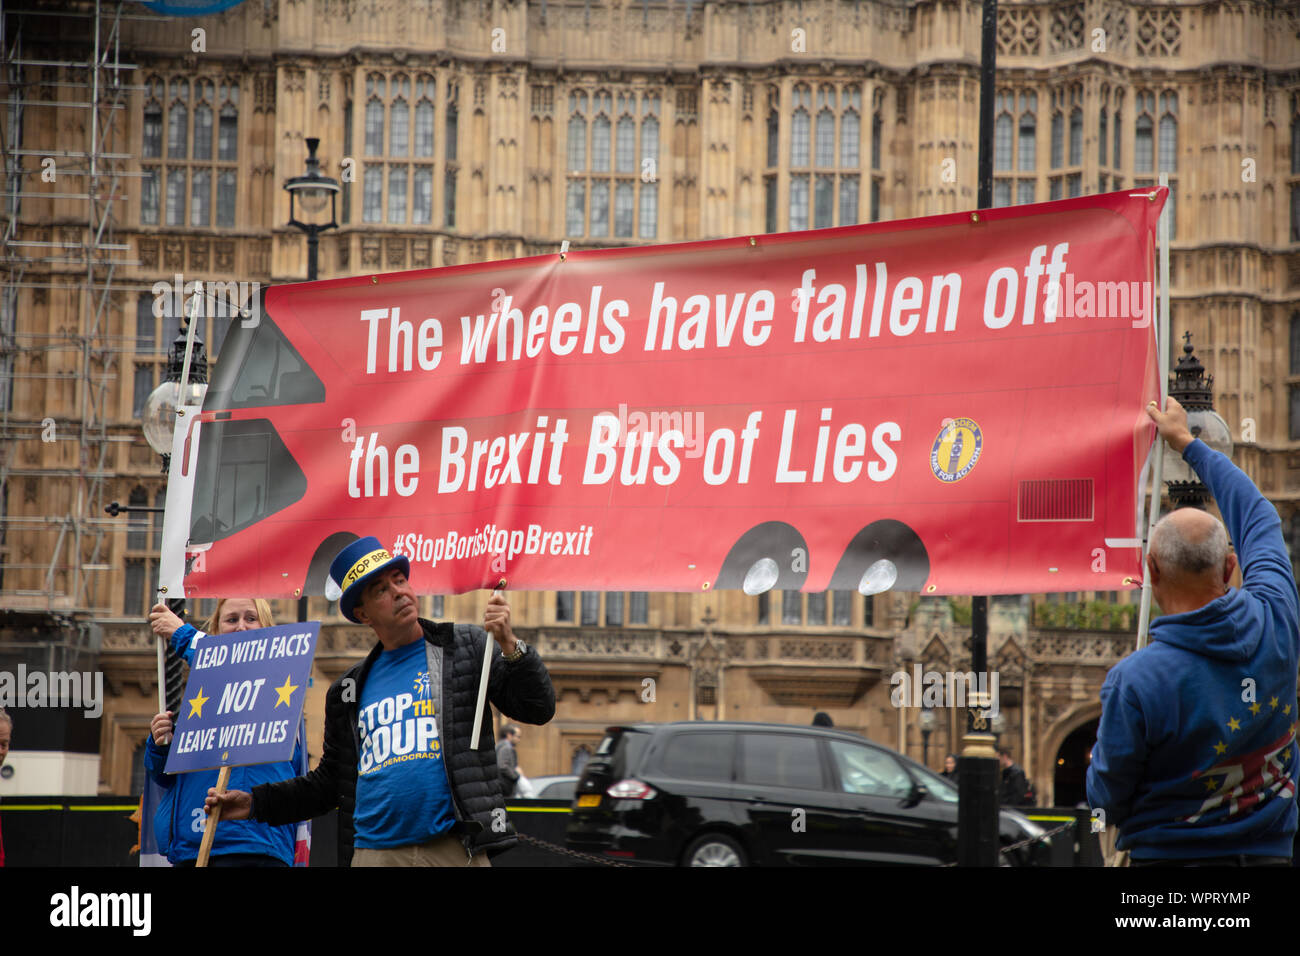 London, UK. 9th September, 2019. Large banner of the anti-Brexit demonstration outside the Houses of Parliament, Westminster, showing a London bus saying ' the wheels have fallen off the Brexit Bus of lies'. The man with the blue hat is the well-known anti-Brexit activist Steve Bray or Mr Stop Brexit. Credit: Joe Kuis / Alamy News Stock Photo